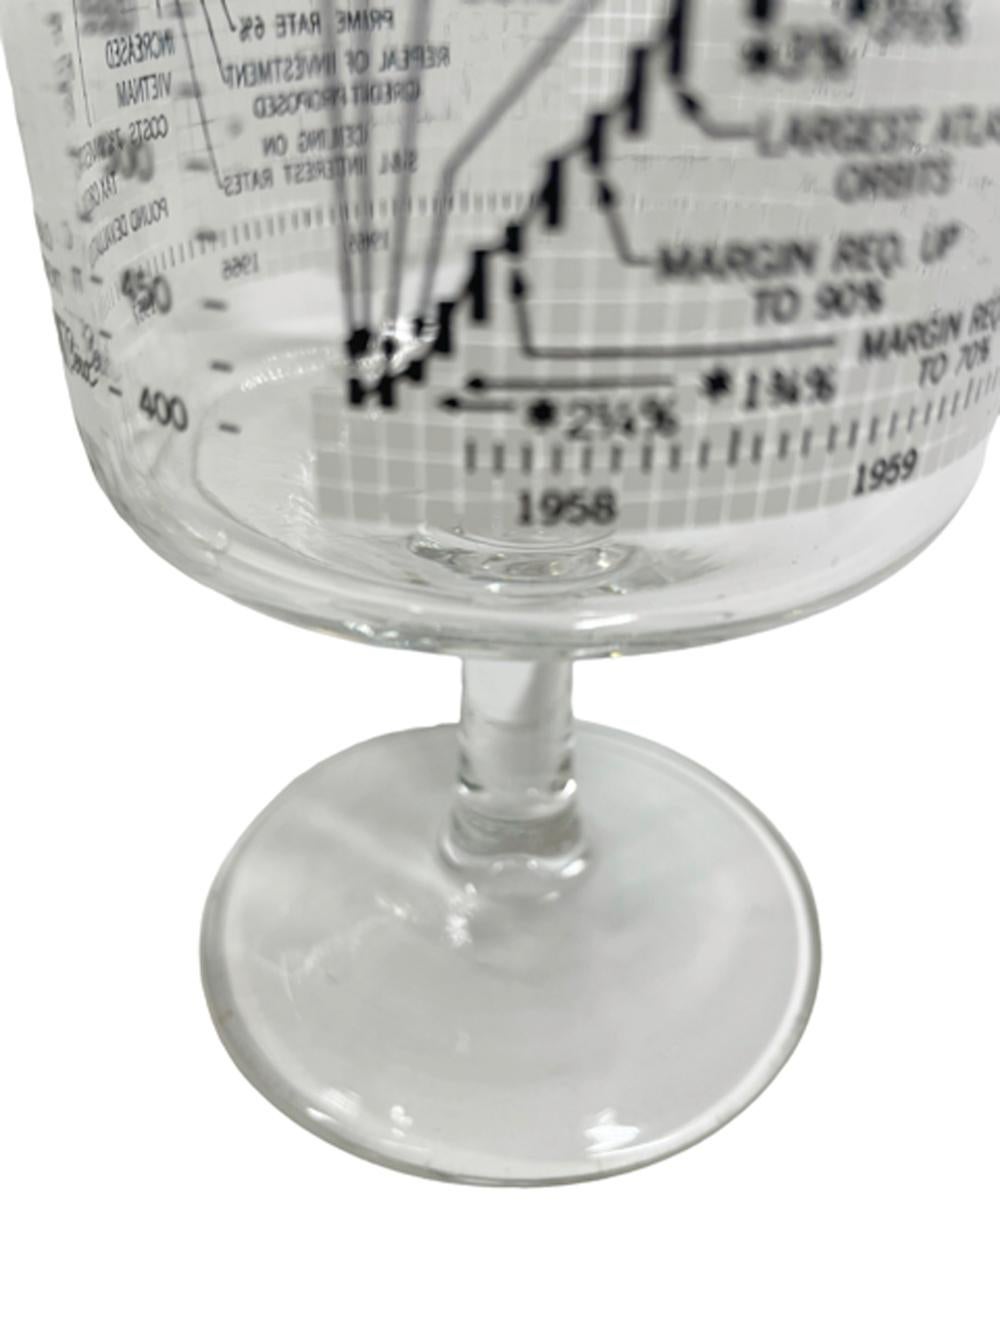 Set of eight stemmed coolers by Cera Glassware in the Ten Year Dow-Jones Industrial Average pattern for the period 1958-1968. Decorated in black and white enamel with a graph of the stock markets activity against world events. The rim of the glass